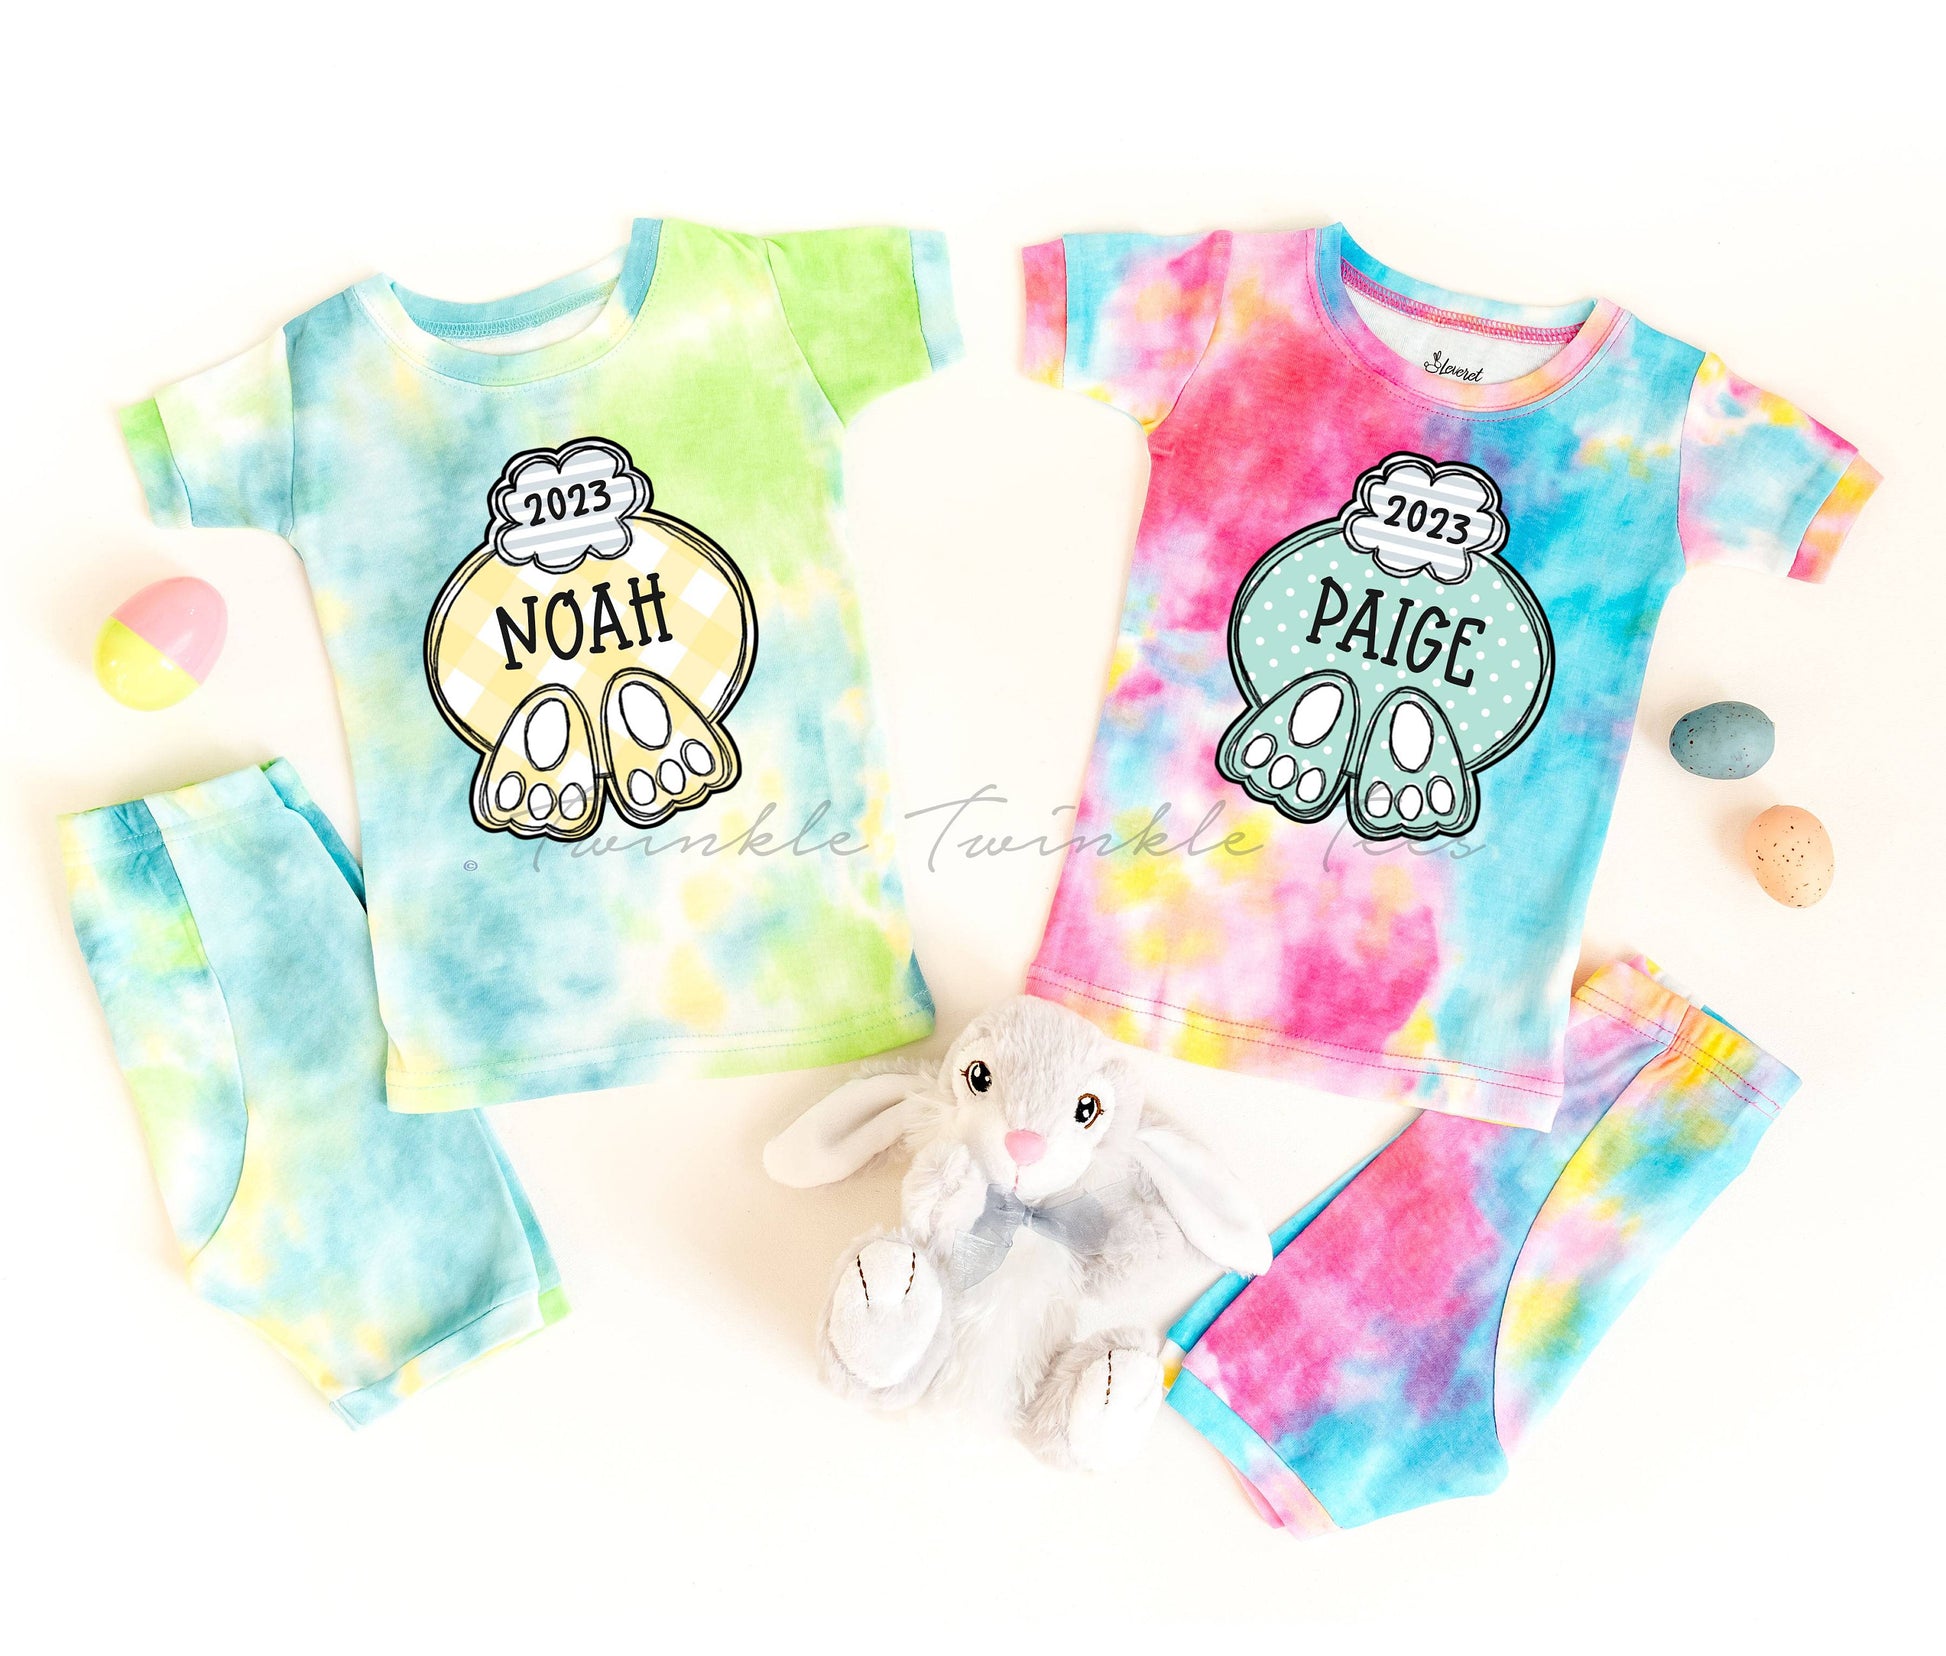 Bunny Butts Personalized Pink and Blue Tie Dye Mix Shorts Pajamas, tie dye easter pajamas